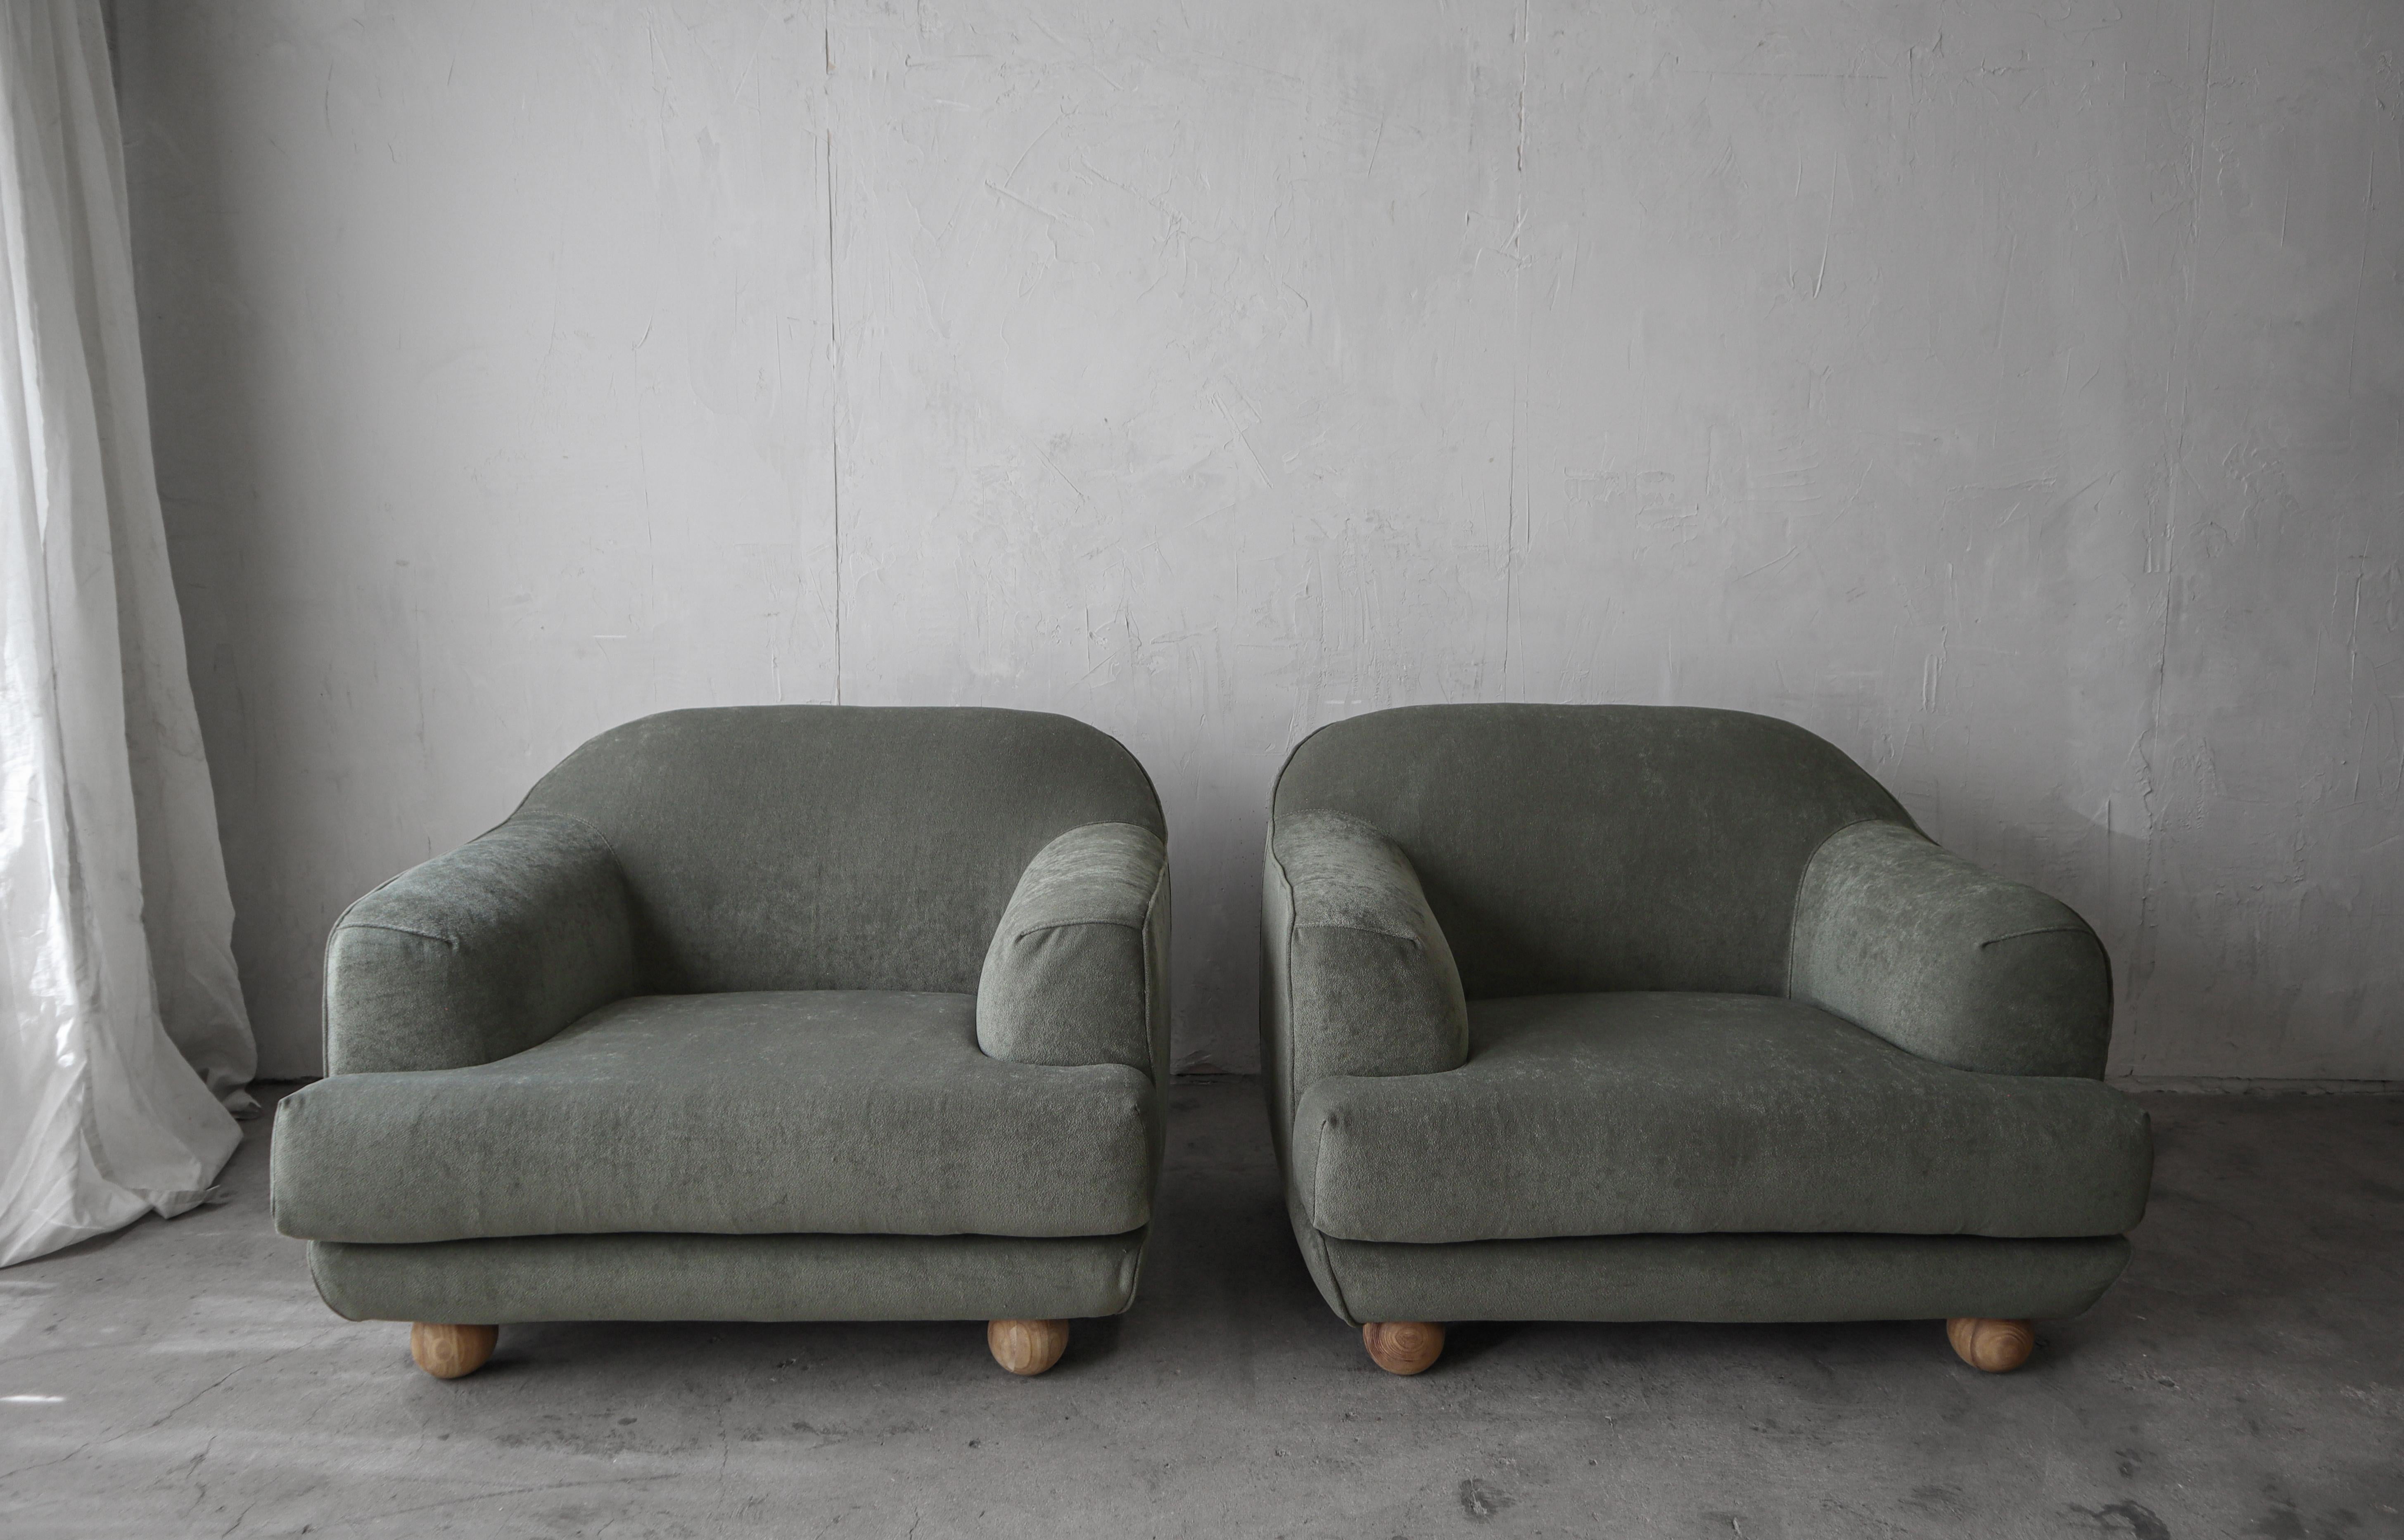 Incredible and large, pair of Post Modern lounge chairs. The lines give them a very feminine and Art Nouveau feel.  They channel designs similar to Jean Royere.  I love their ball feet.

The chairs are comfortable and structurally sound. The sage